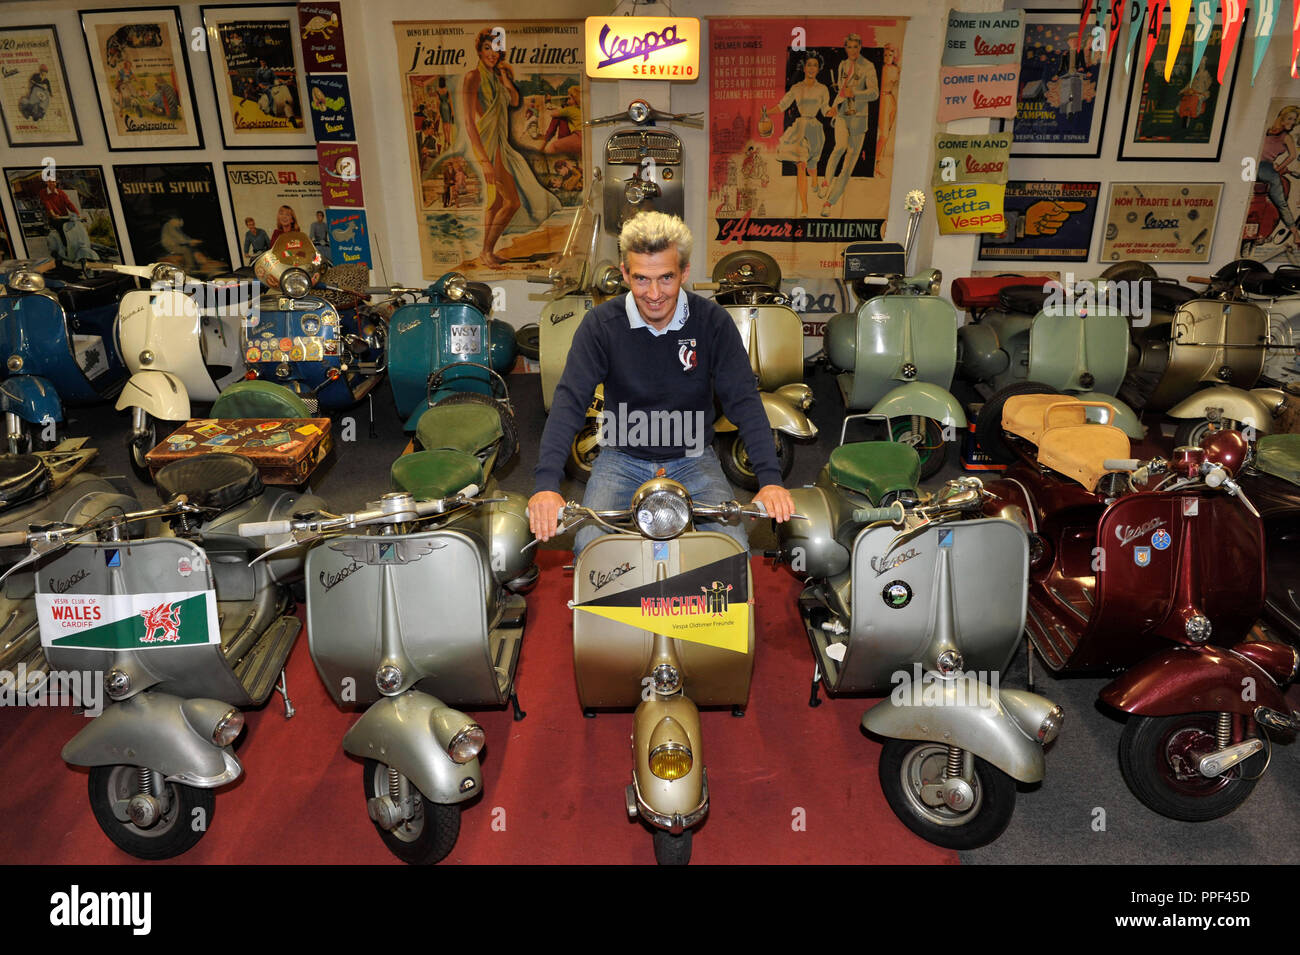 The Vespa collector and expert Robin Davy has set up a private Vespa museum  in the garage. The picture shows him surrounded by his scooters Stock Photo  - Alamy